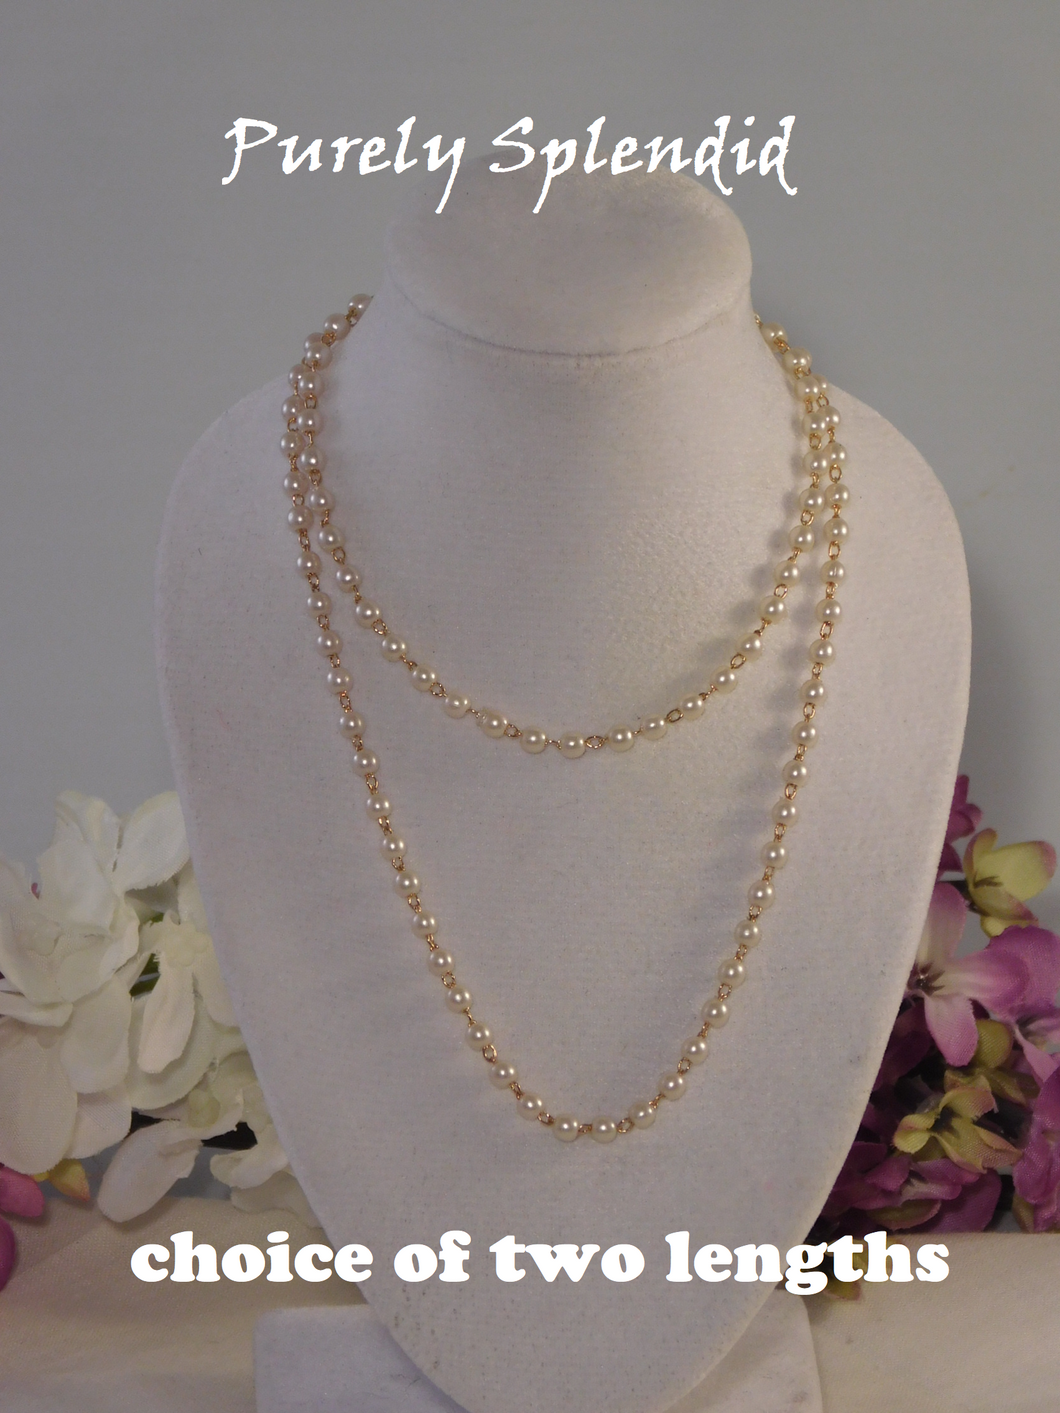 Dainty Pearl Necklace shown in choice of two lengths